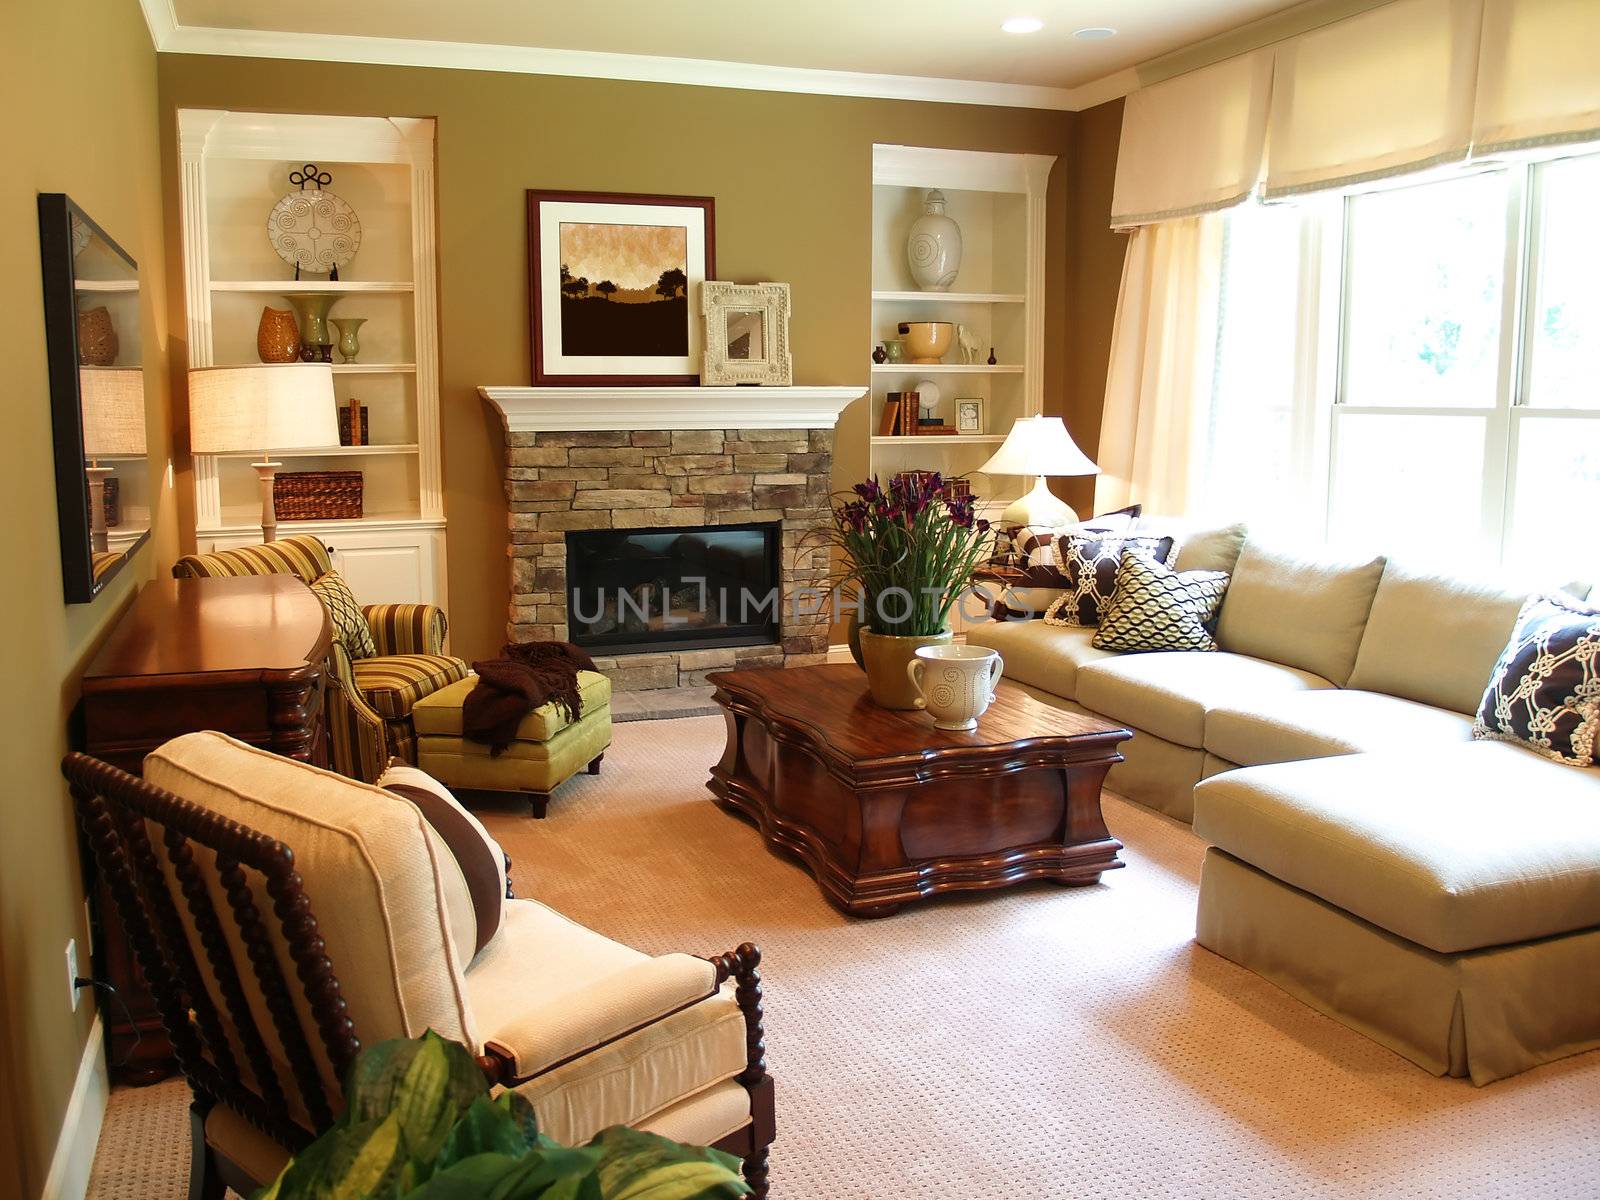 A well furnished family room with a stone fireplace lit by the sunlight